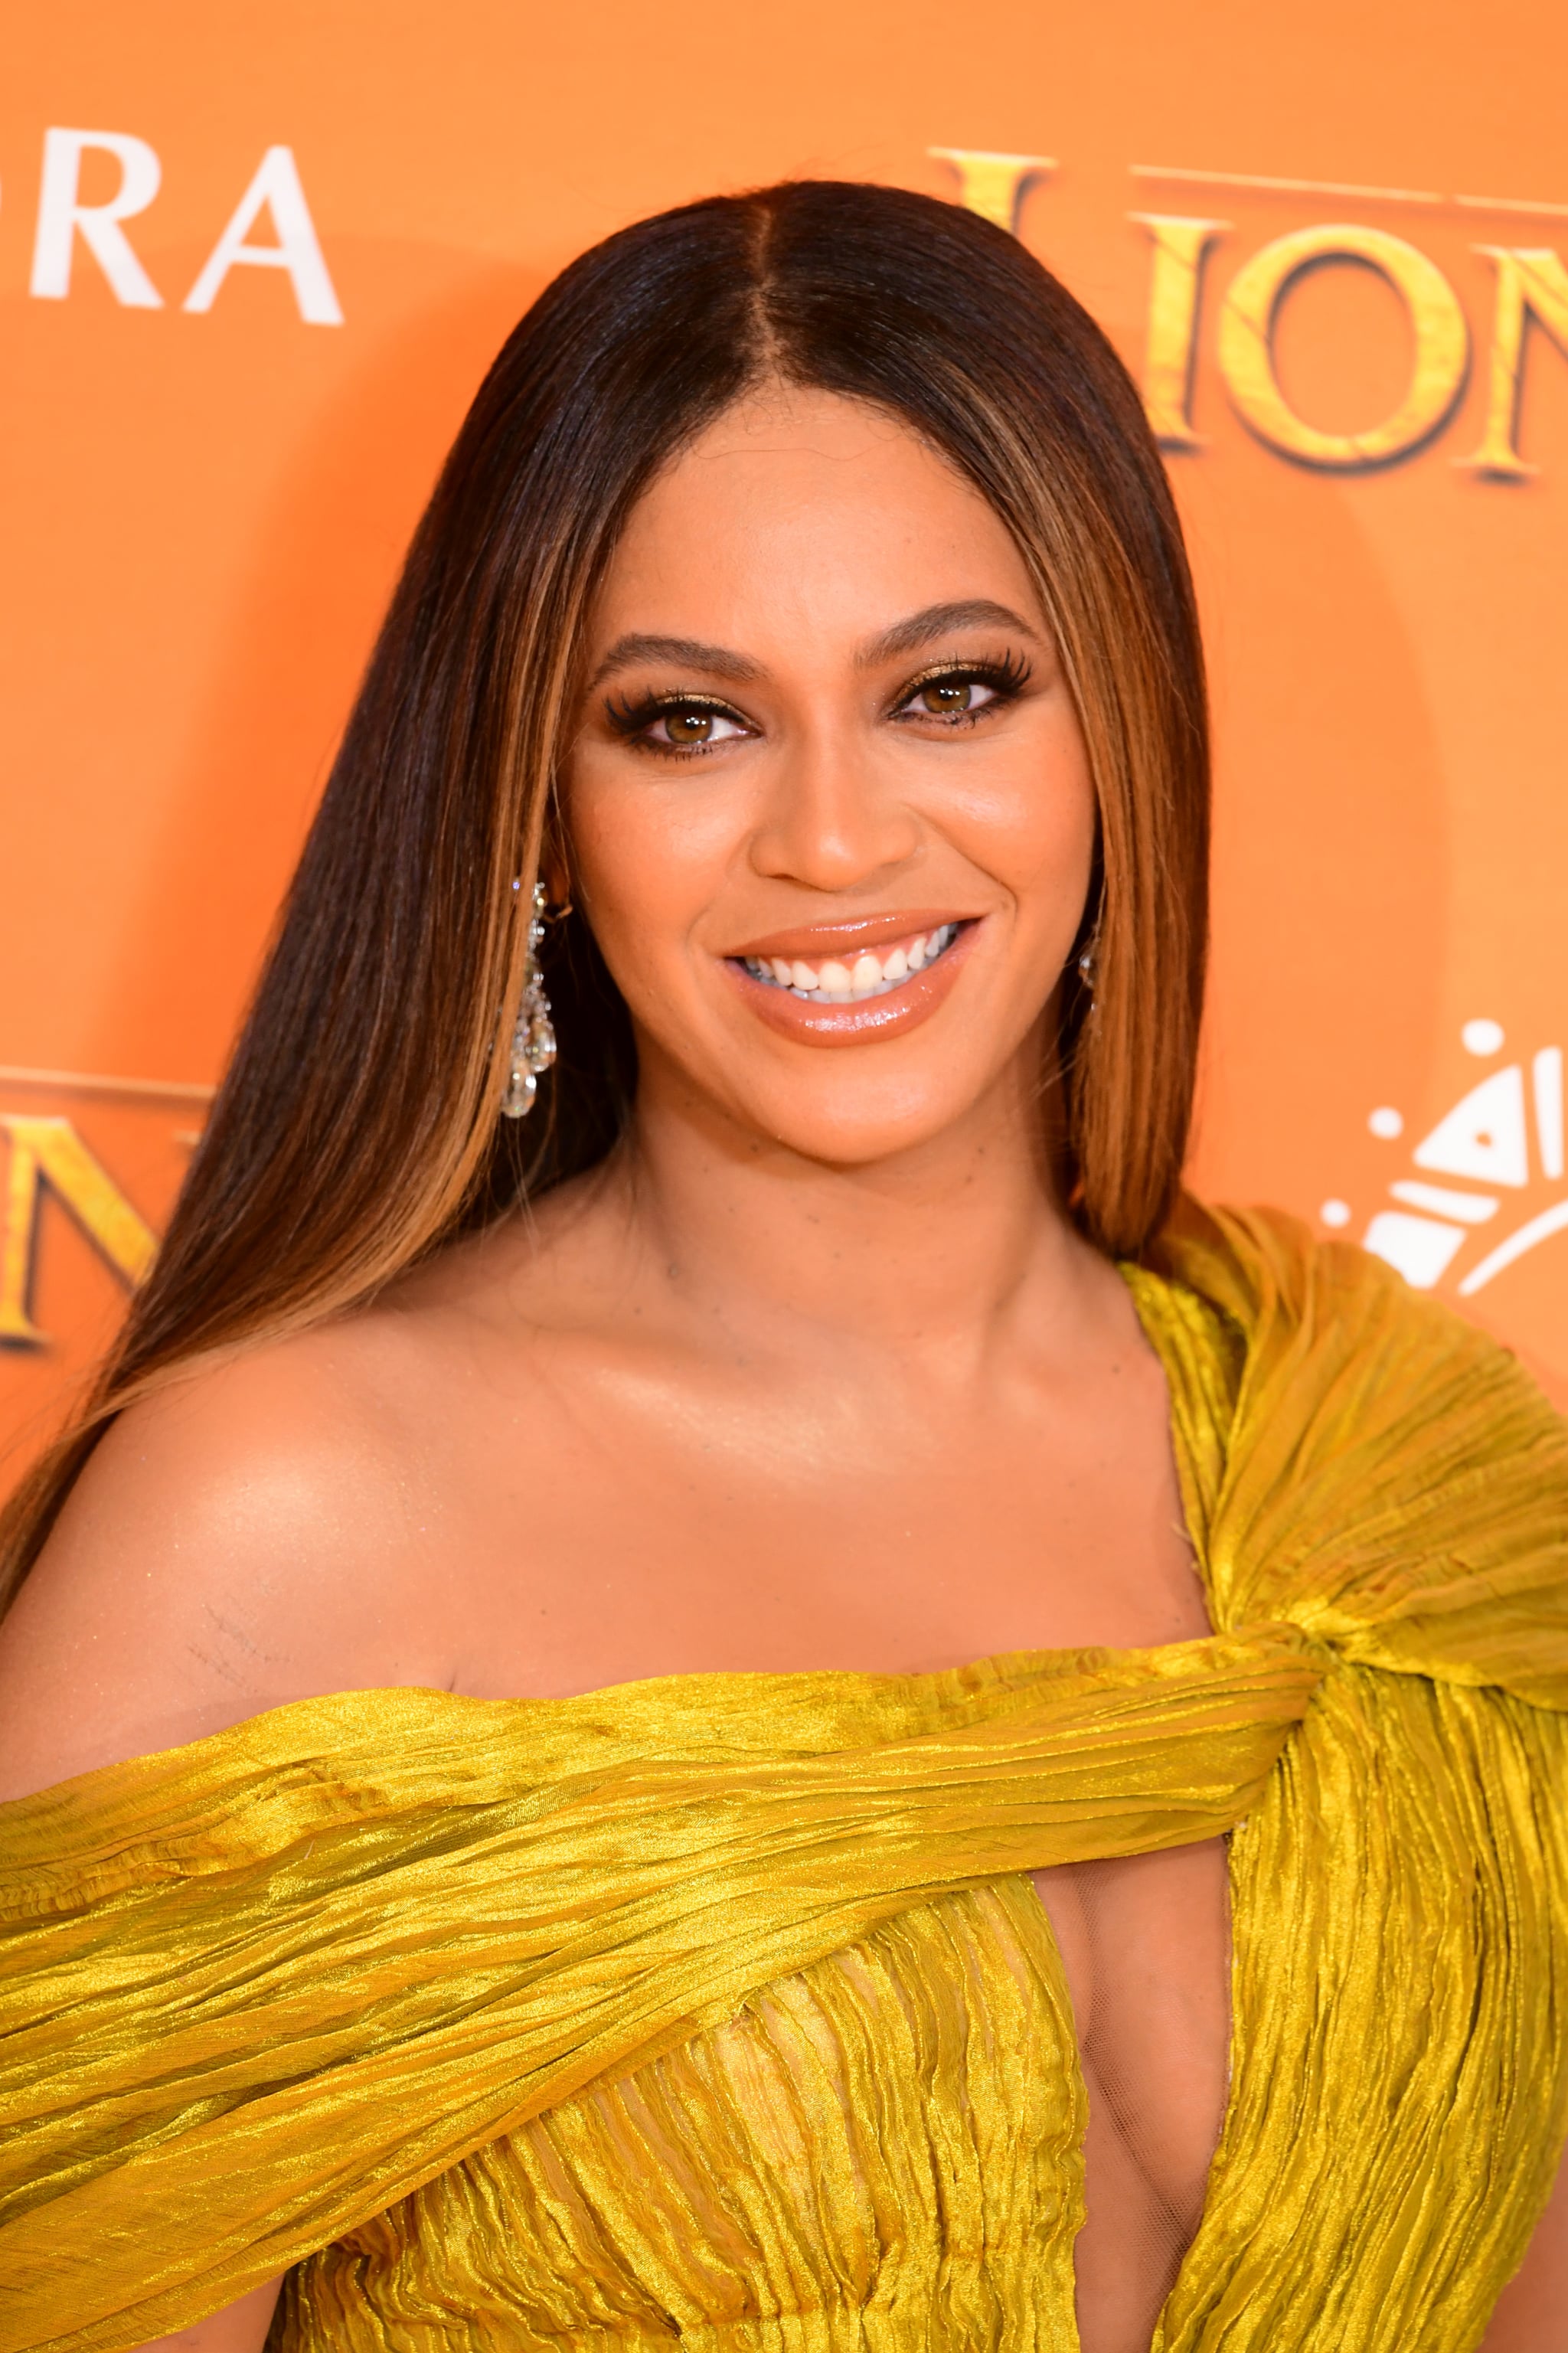 Beyonce attending Disney's The Lion King European Premiere held in Leicester Square, London. (Photo by Ian West/PA Images via Getty Images)